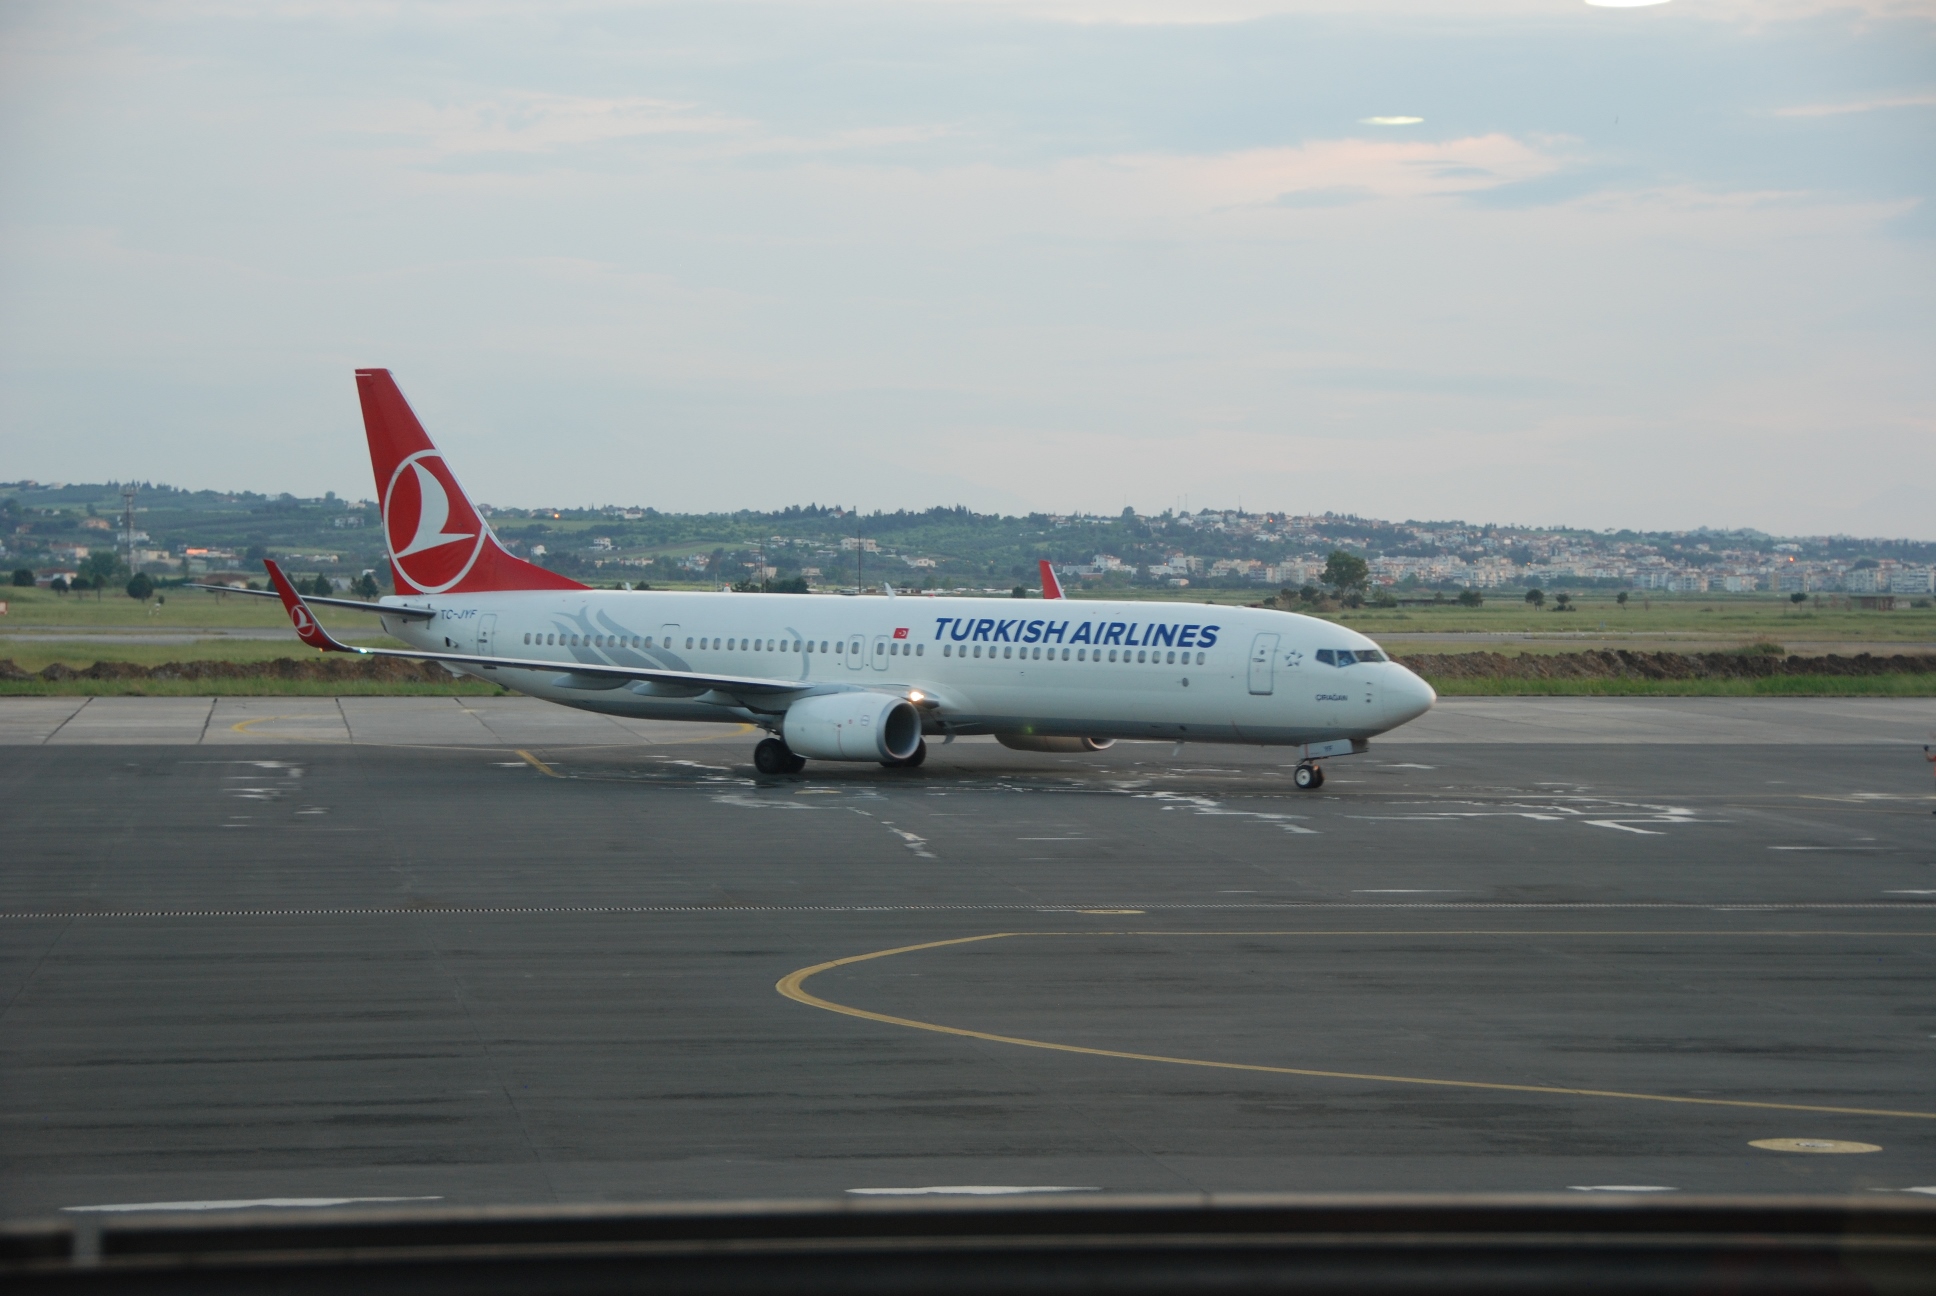 THY_Turkish Airlines_Boeing 737-900_TC-JYF_Thessaloniki Airport_May 2015